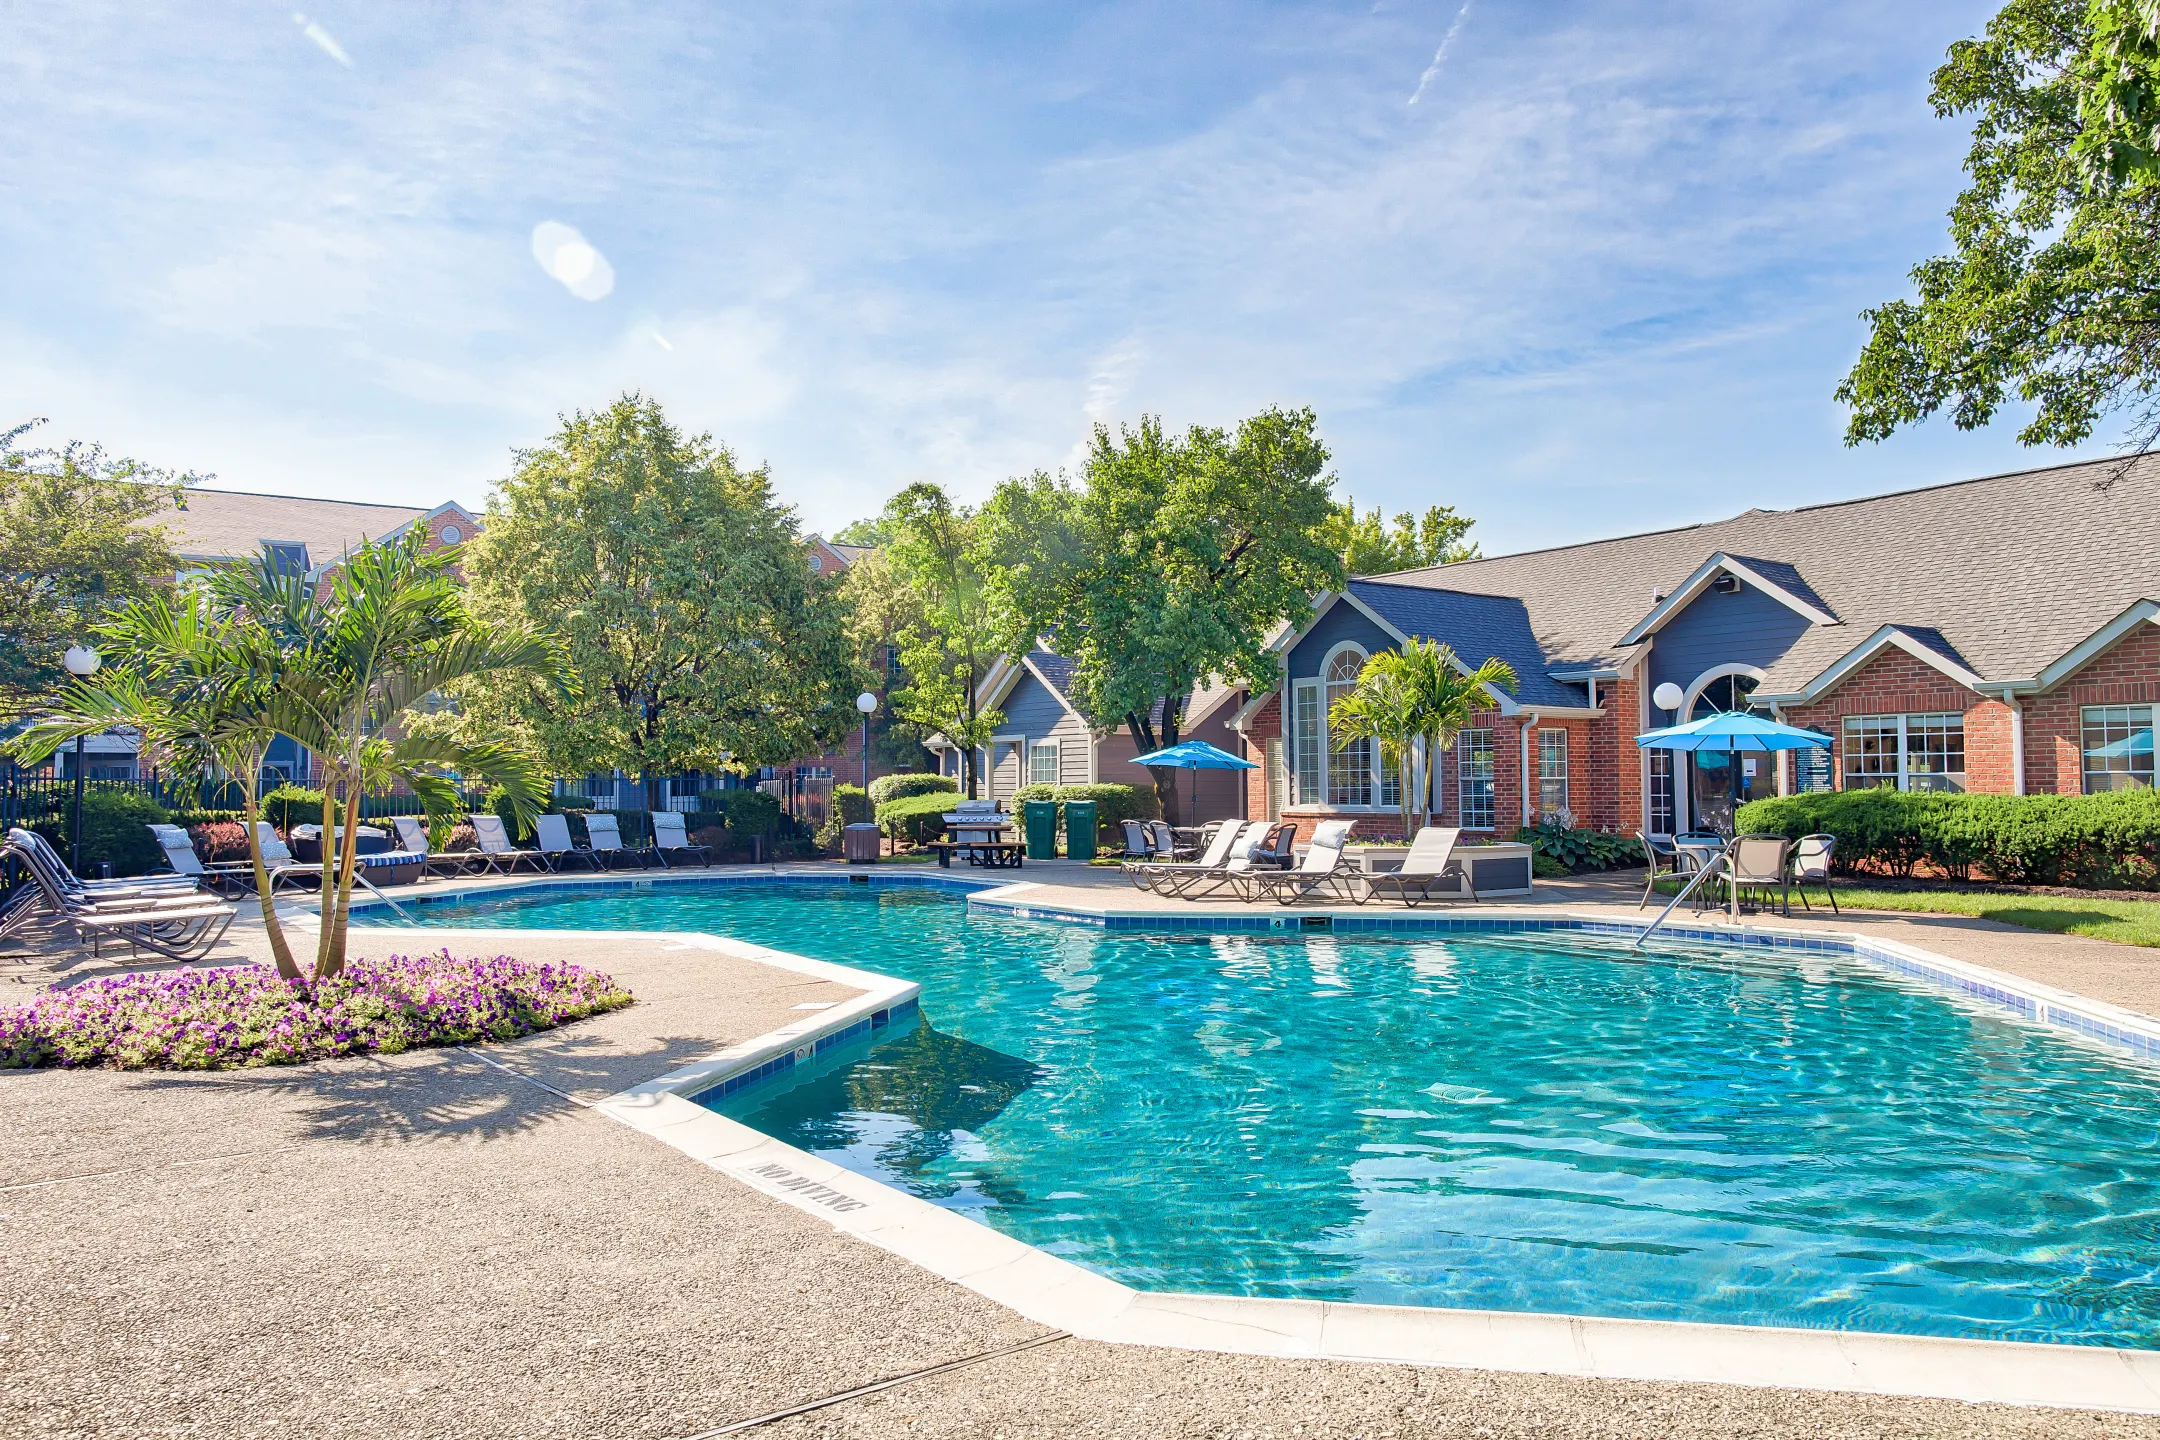 Pool - Lakeshore - Indianapolis, IN